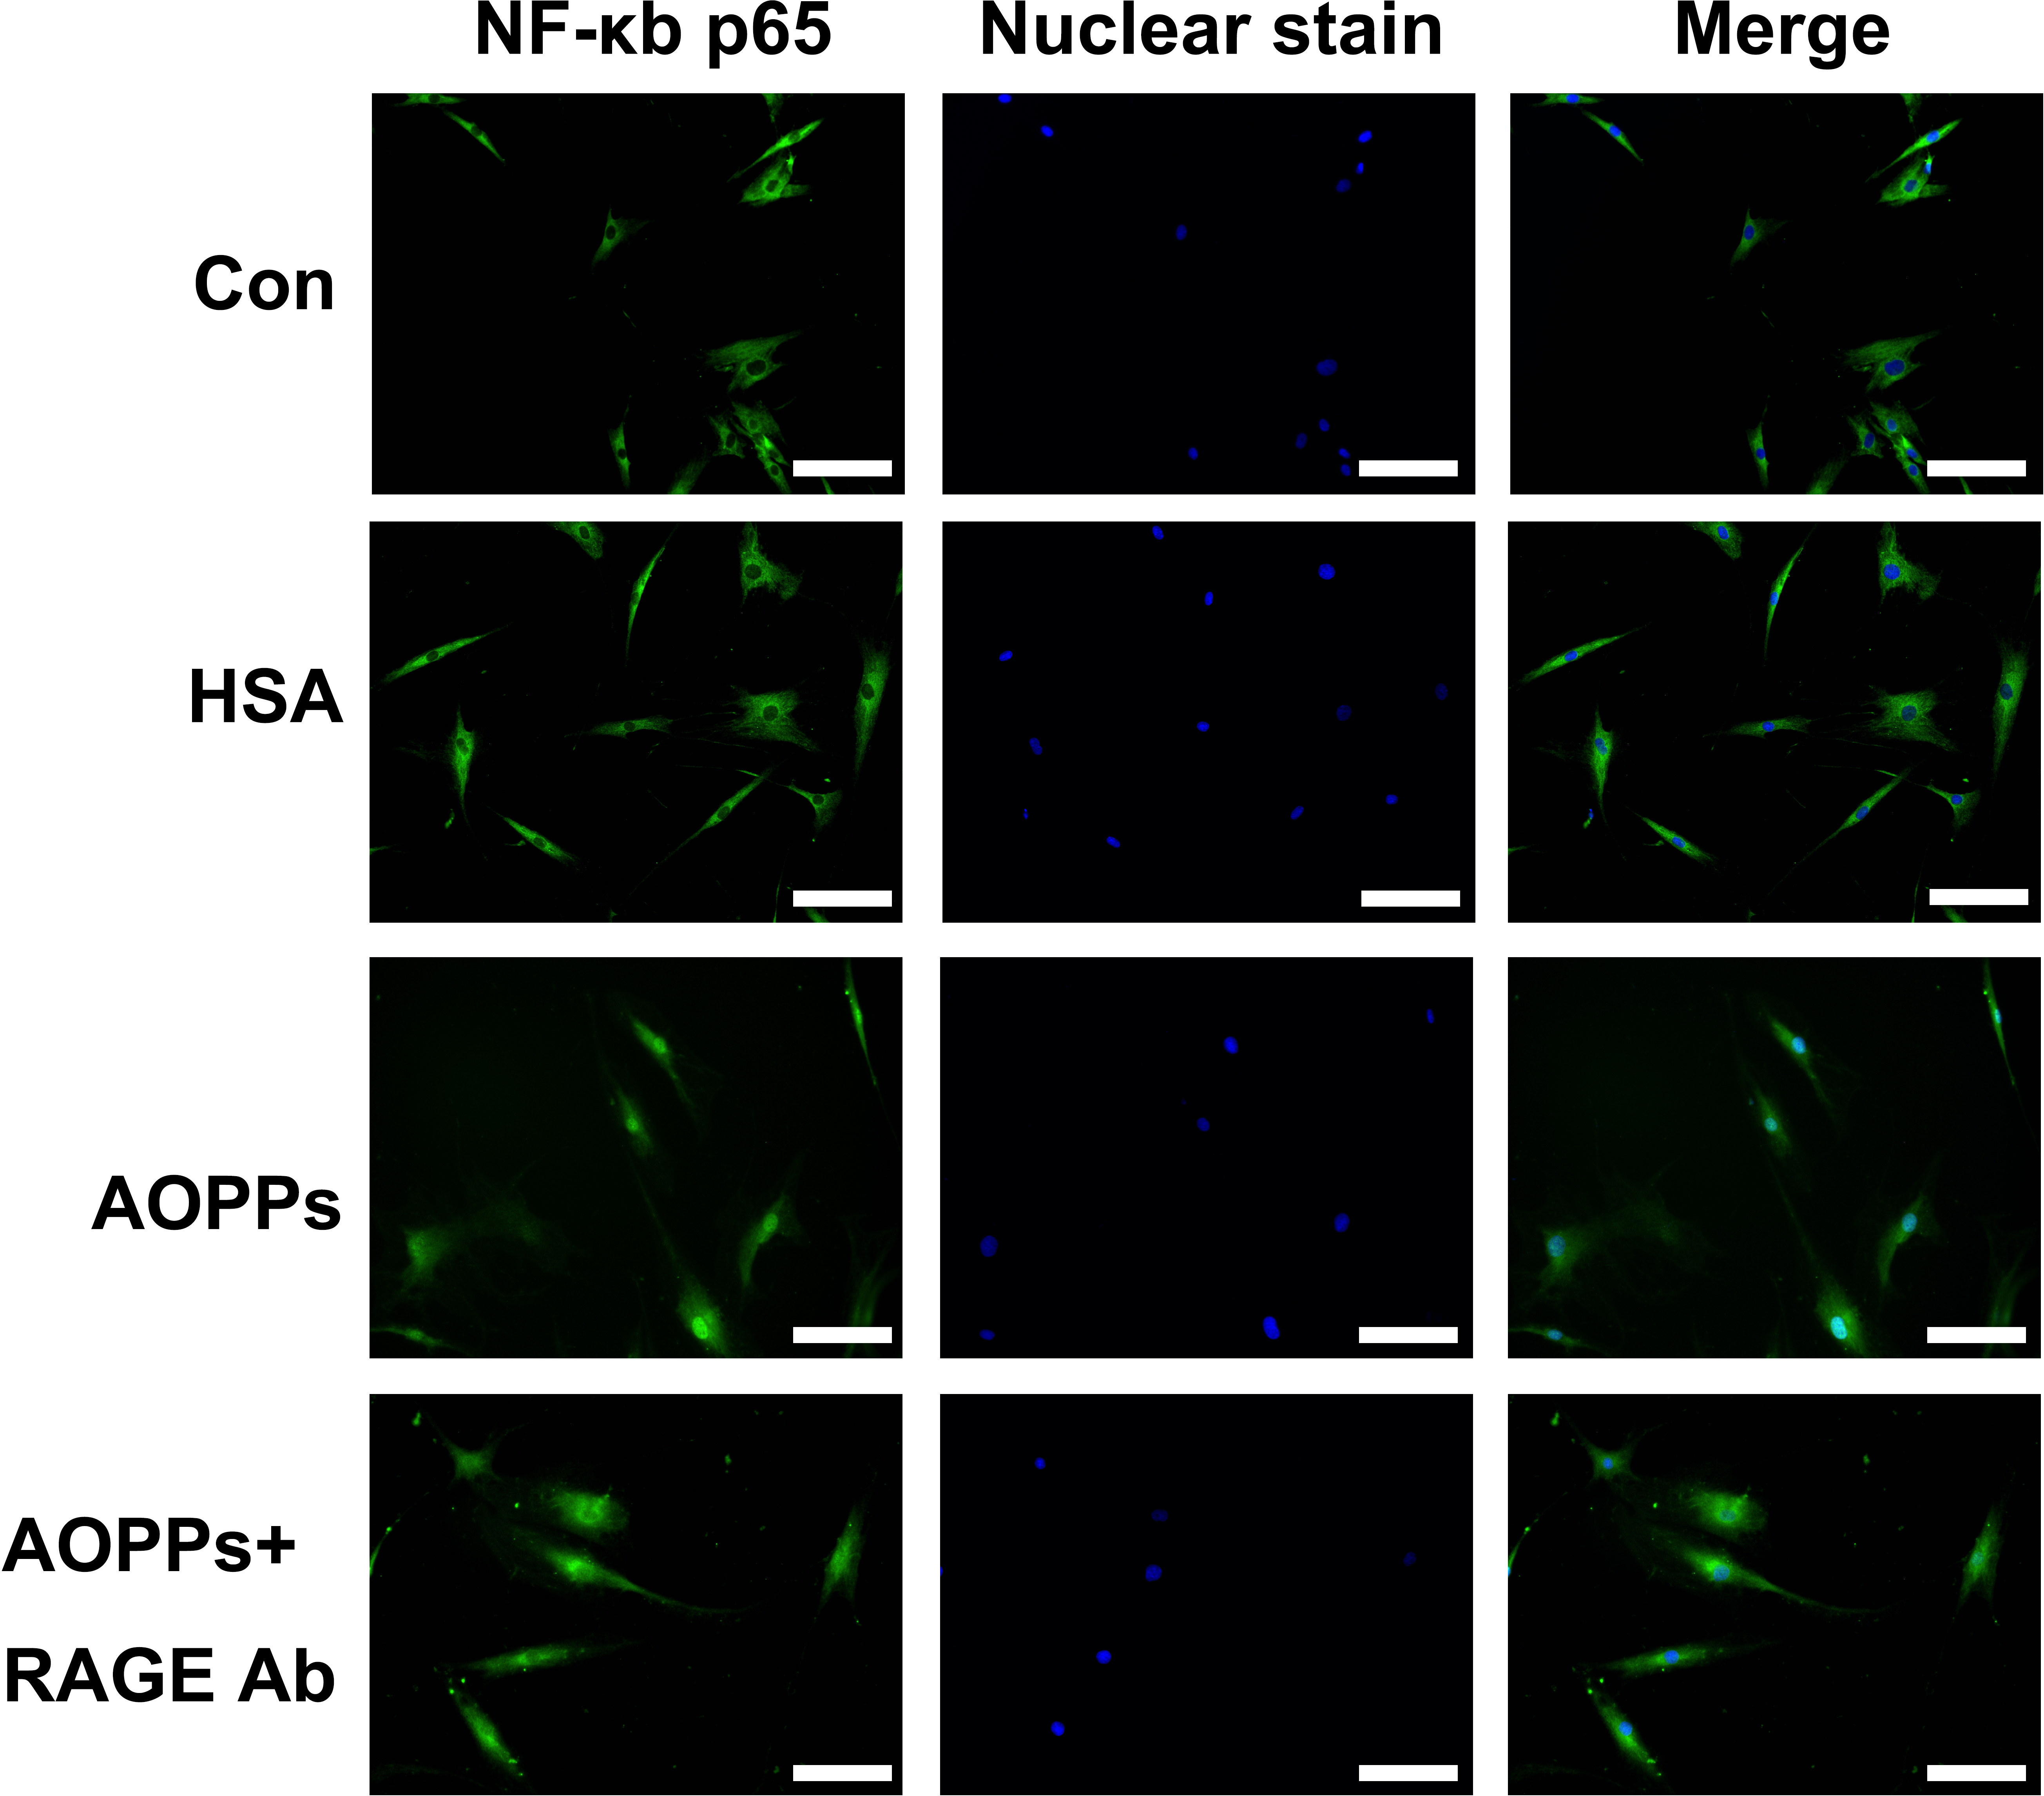 Fig. 3 
            NF-κB p65 translocation was detected by immunofluorescence and 4′,6-diamidino-2-phenylindole (DAPI) staining. Fluorescence micrographs with staining for nuclear factor-κB (NF-κB) p65 (green) and nuclei (blue) after rheumatoid arthritis fibroblast-like synoviocytes (RA-FLSs) were treated with advanced oxidation protein product-human serum albumin (AOPP-HSA) (100 μg/ml), medium alone (control), or native HSA for three hours. Magnification 400×. White scale bars represent 50 µm. Representative images of three independent experiments were shown. Con, control; RAGE, receptor for advanced glycation end products.
          